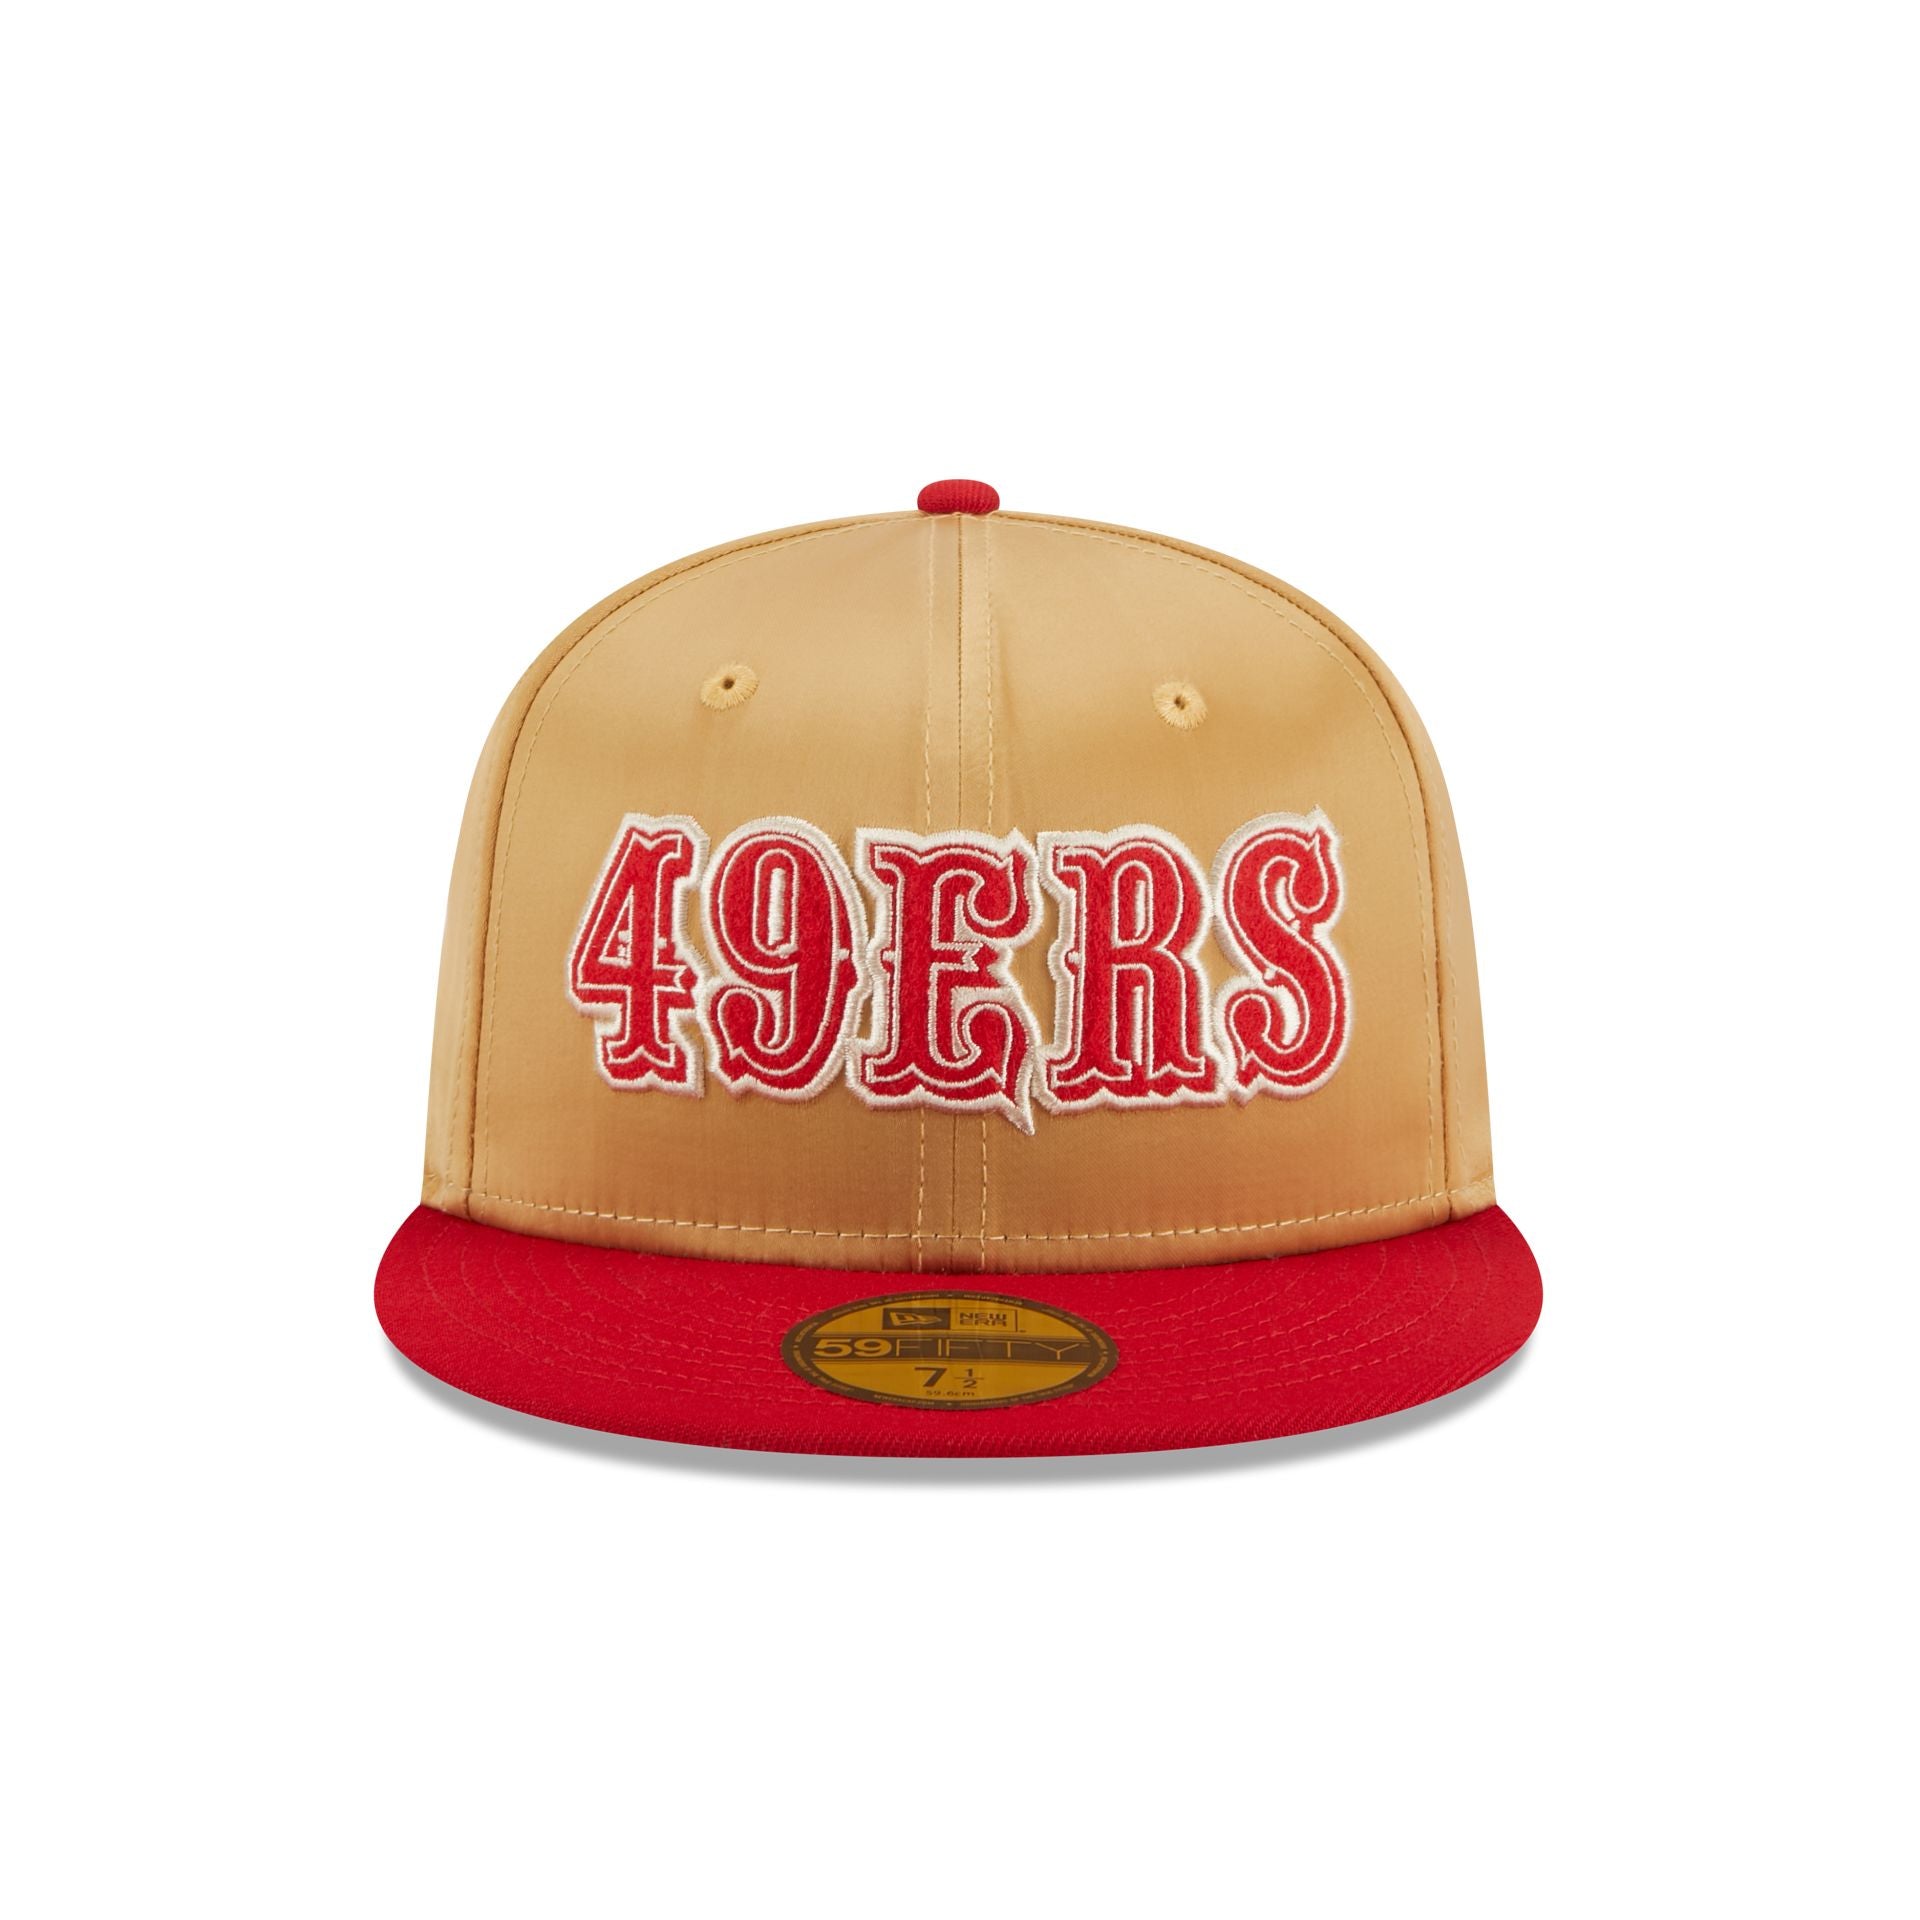 SAN FRANCISCO 49ERS FITTED 60355964